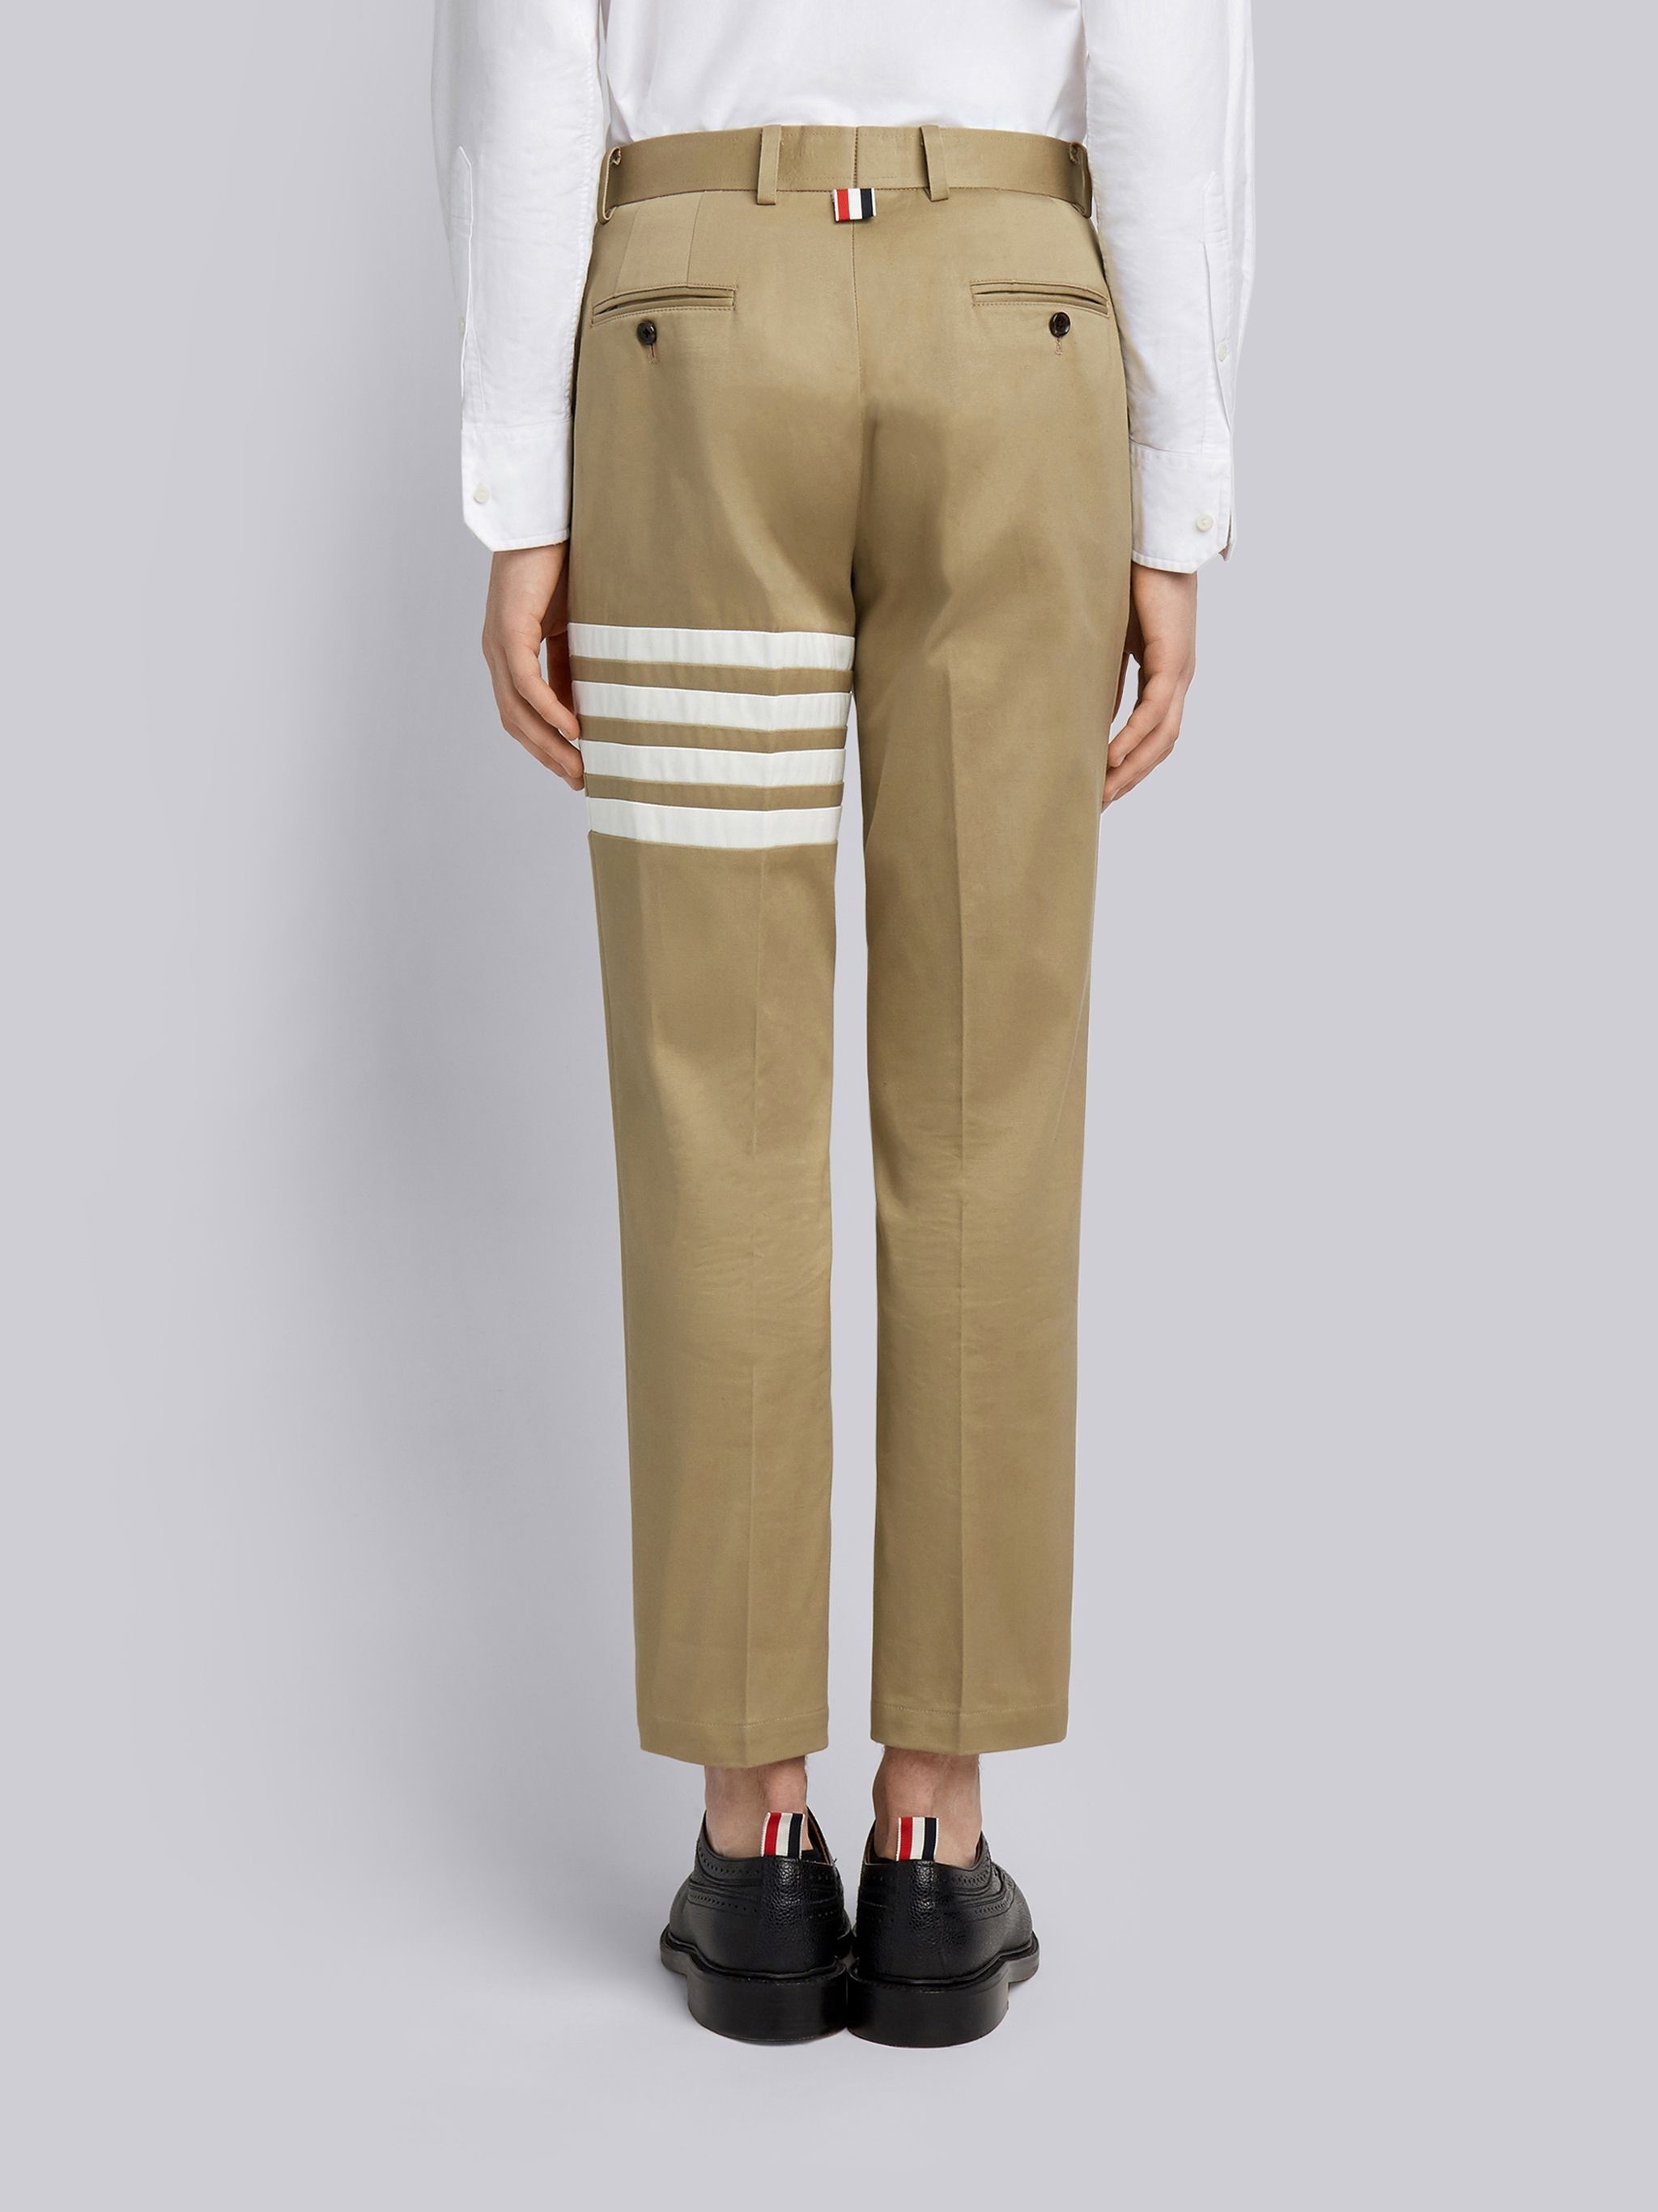 Camel Cotton Twill Knit Seamed 4-bar Unconstructed Chino Trouser - 3